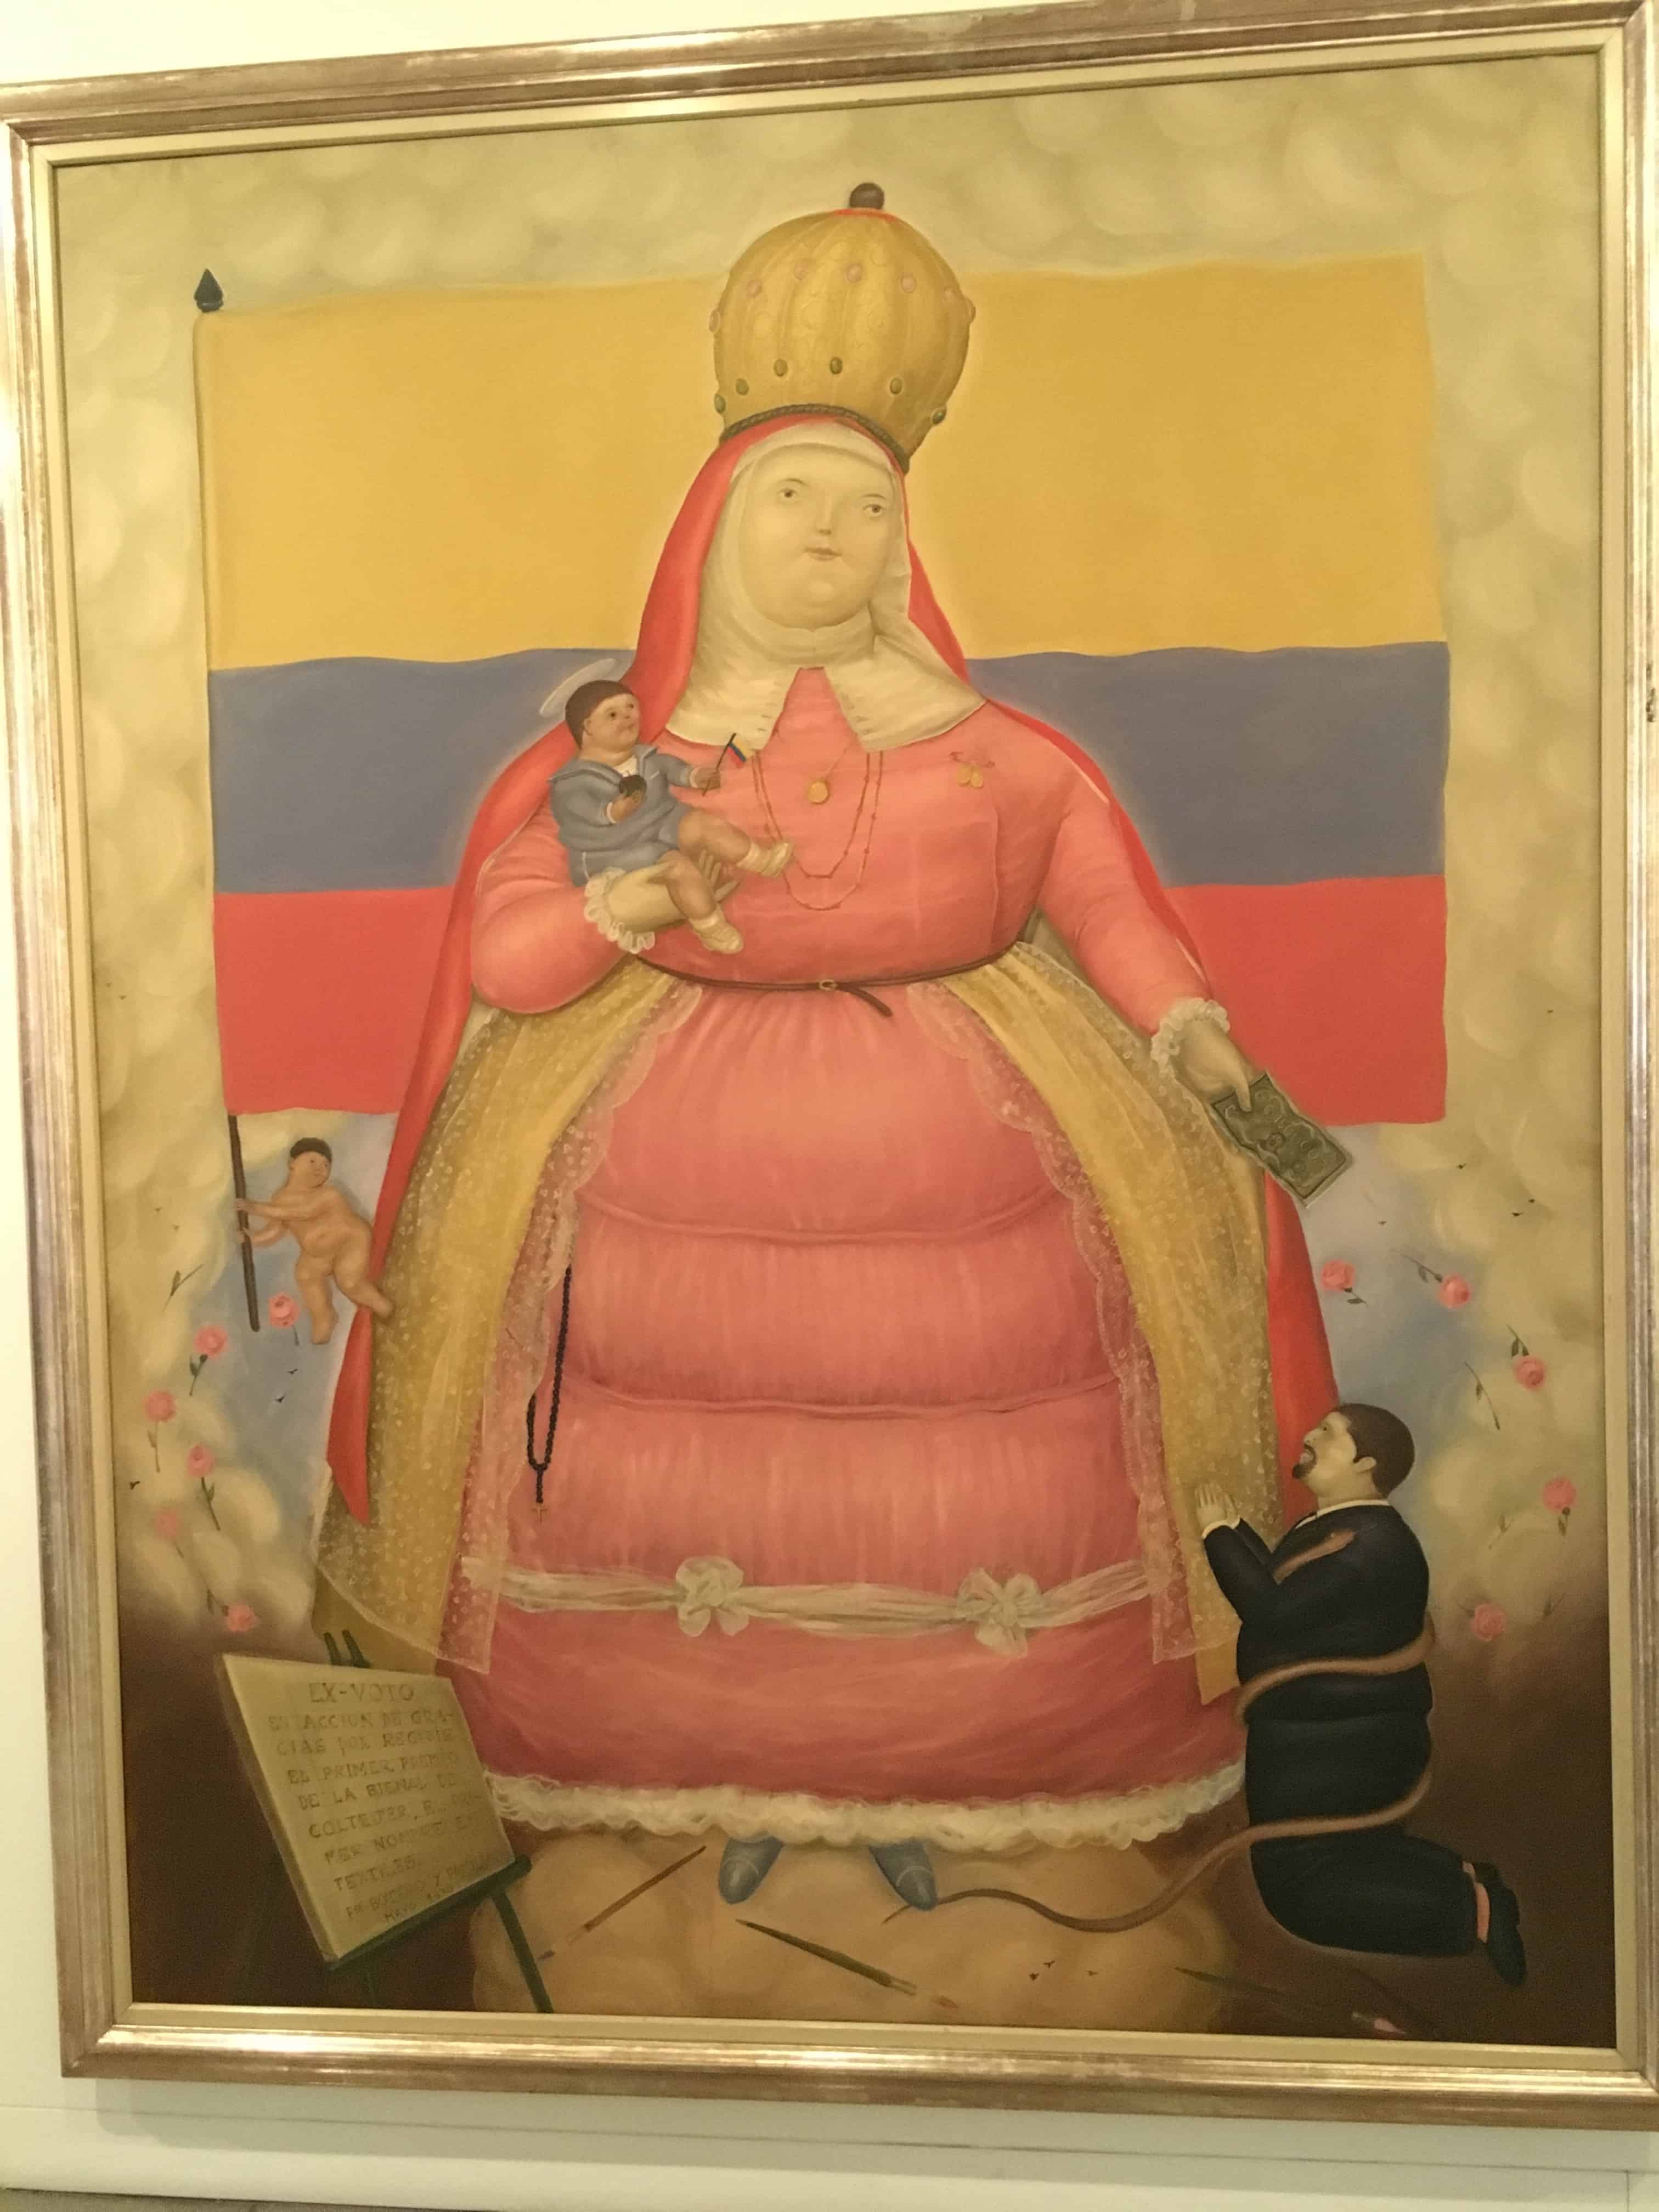 A political work by Botero at the Antioquia Museum in Medellín, Colombia